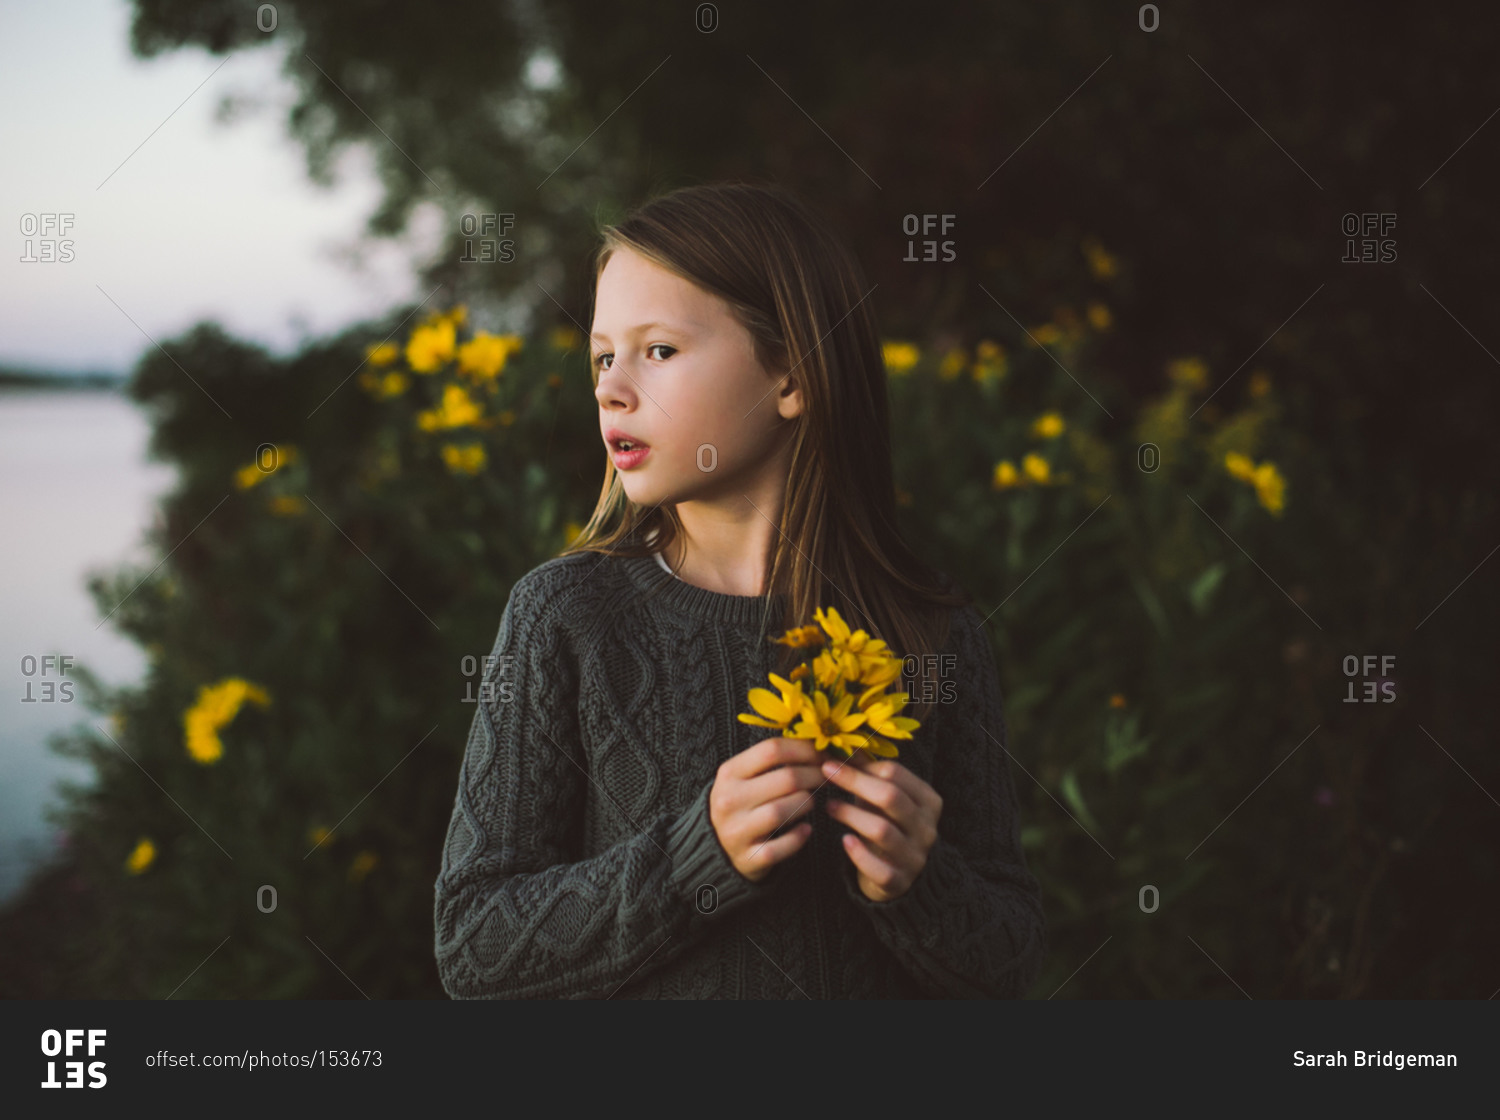 Profile of a girl with yellow flowers